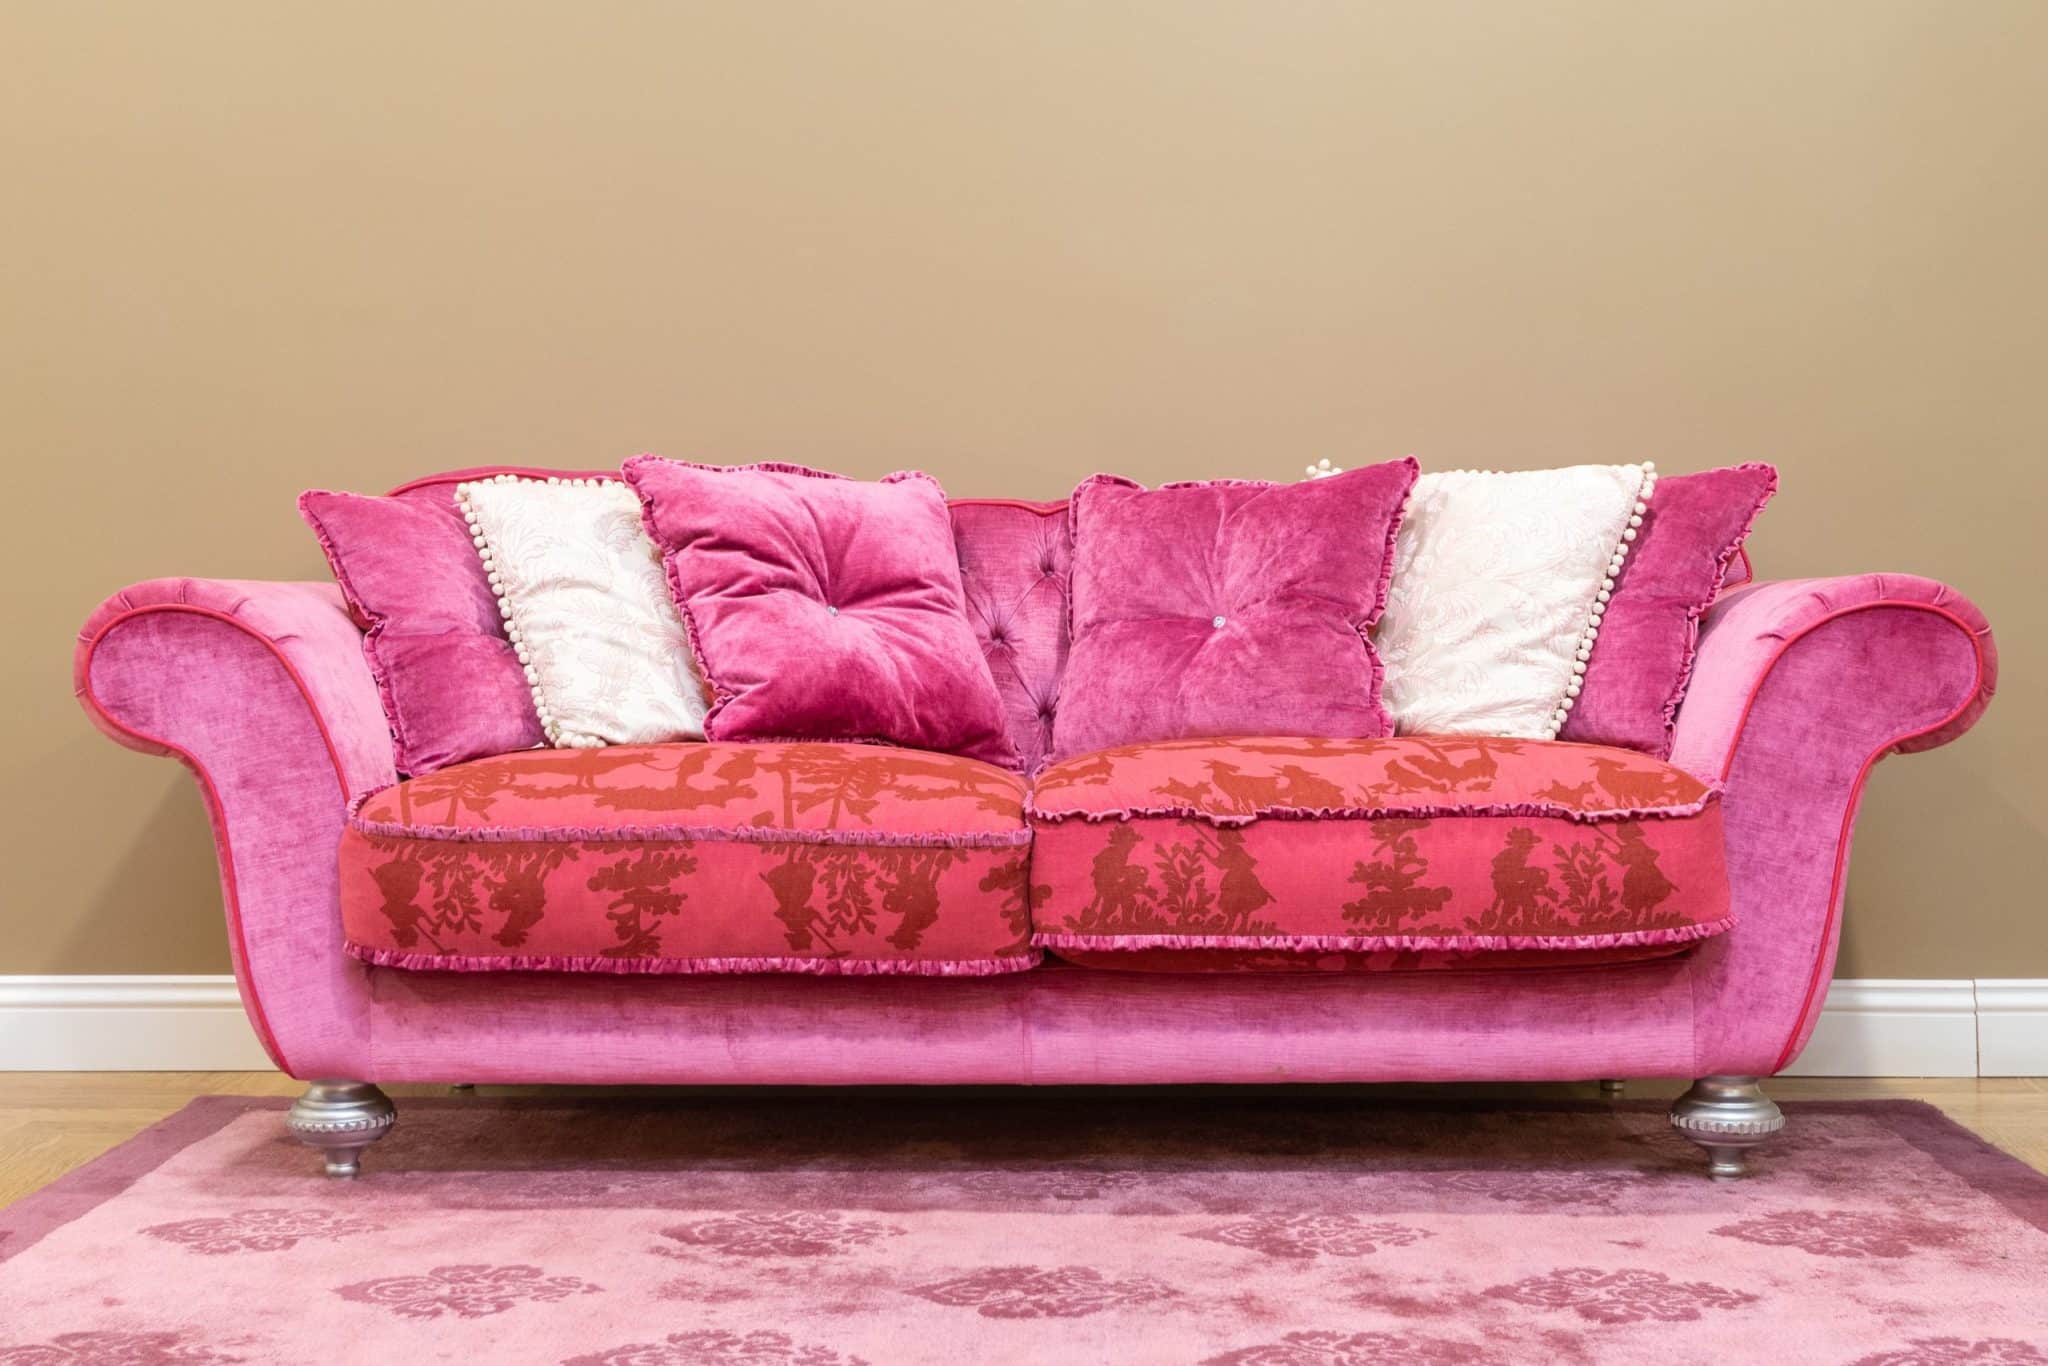 What are Some Popular Designs for Pink Couches?